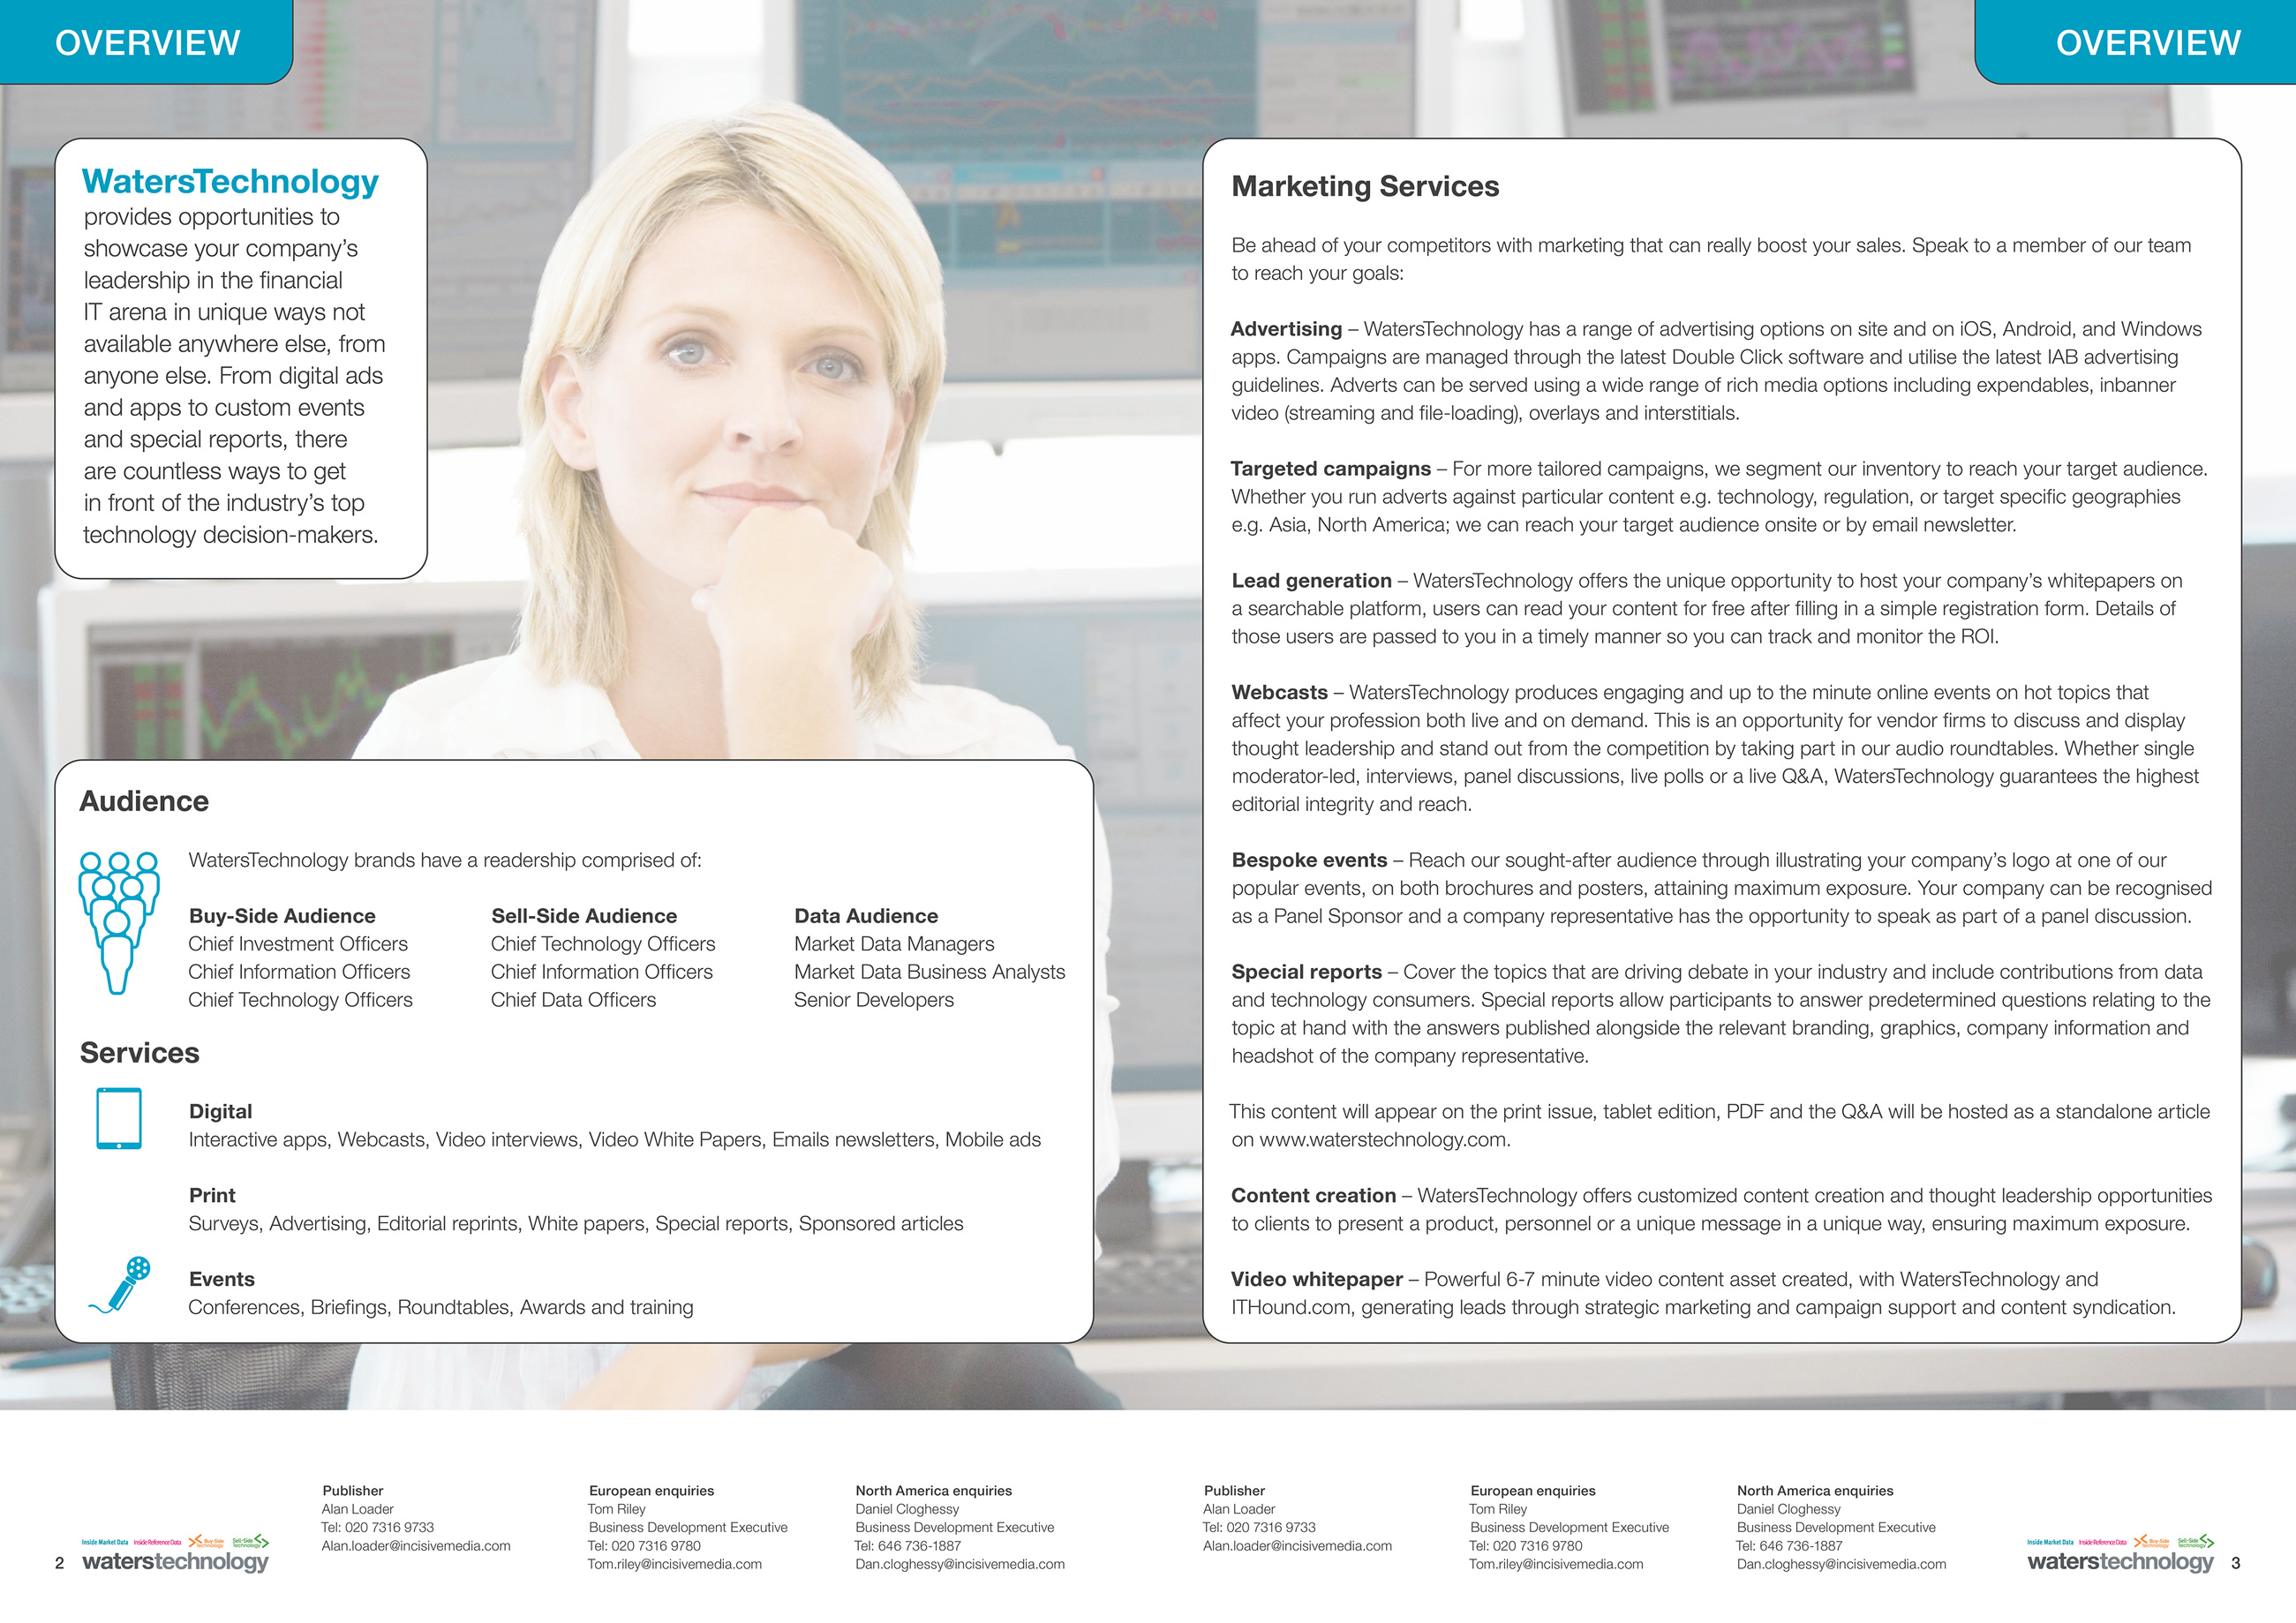 Inside spread of brochure for Waters Technology. The background is a photo of a woman standing in front of a bank of computer monitors and looking at the camera. Large areas of text describe Waters' audience and services.